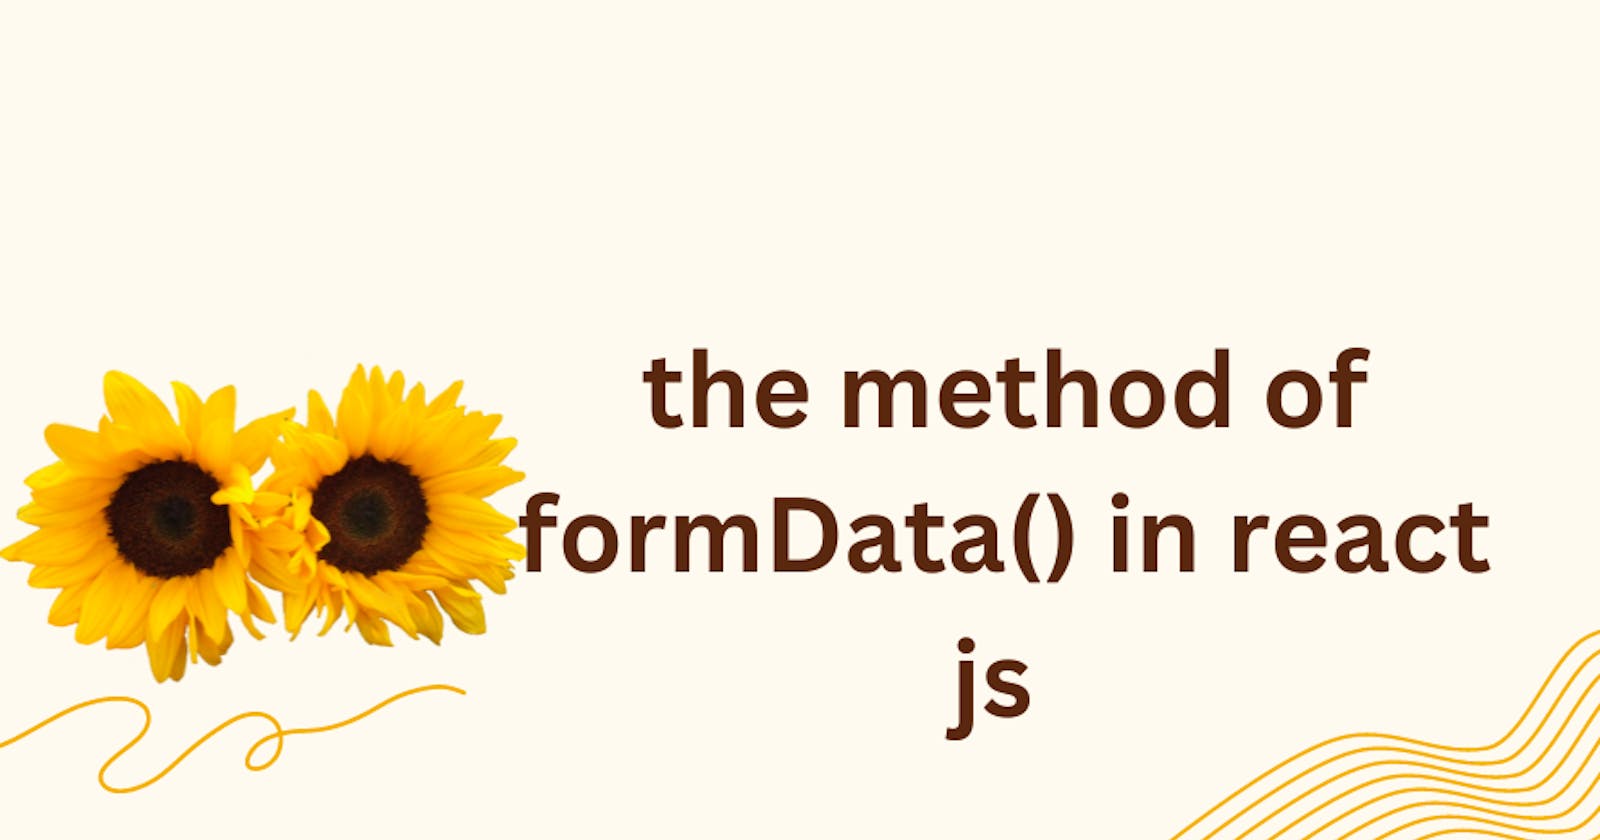 What is FormData () in react js?